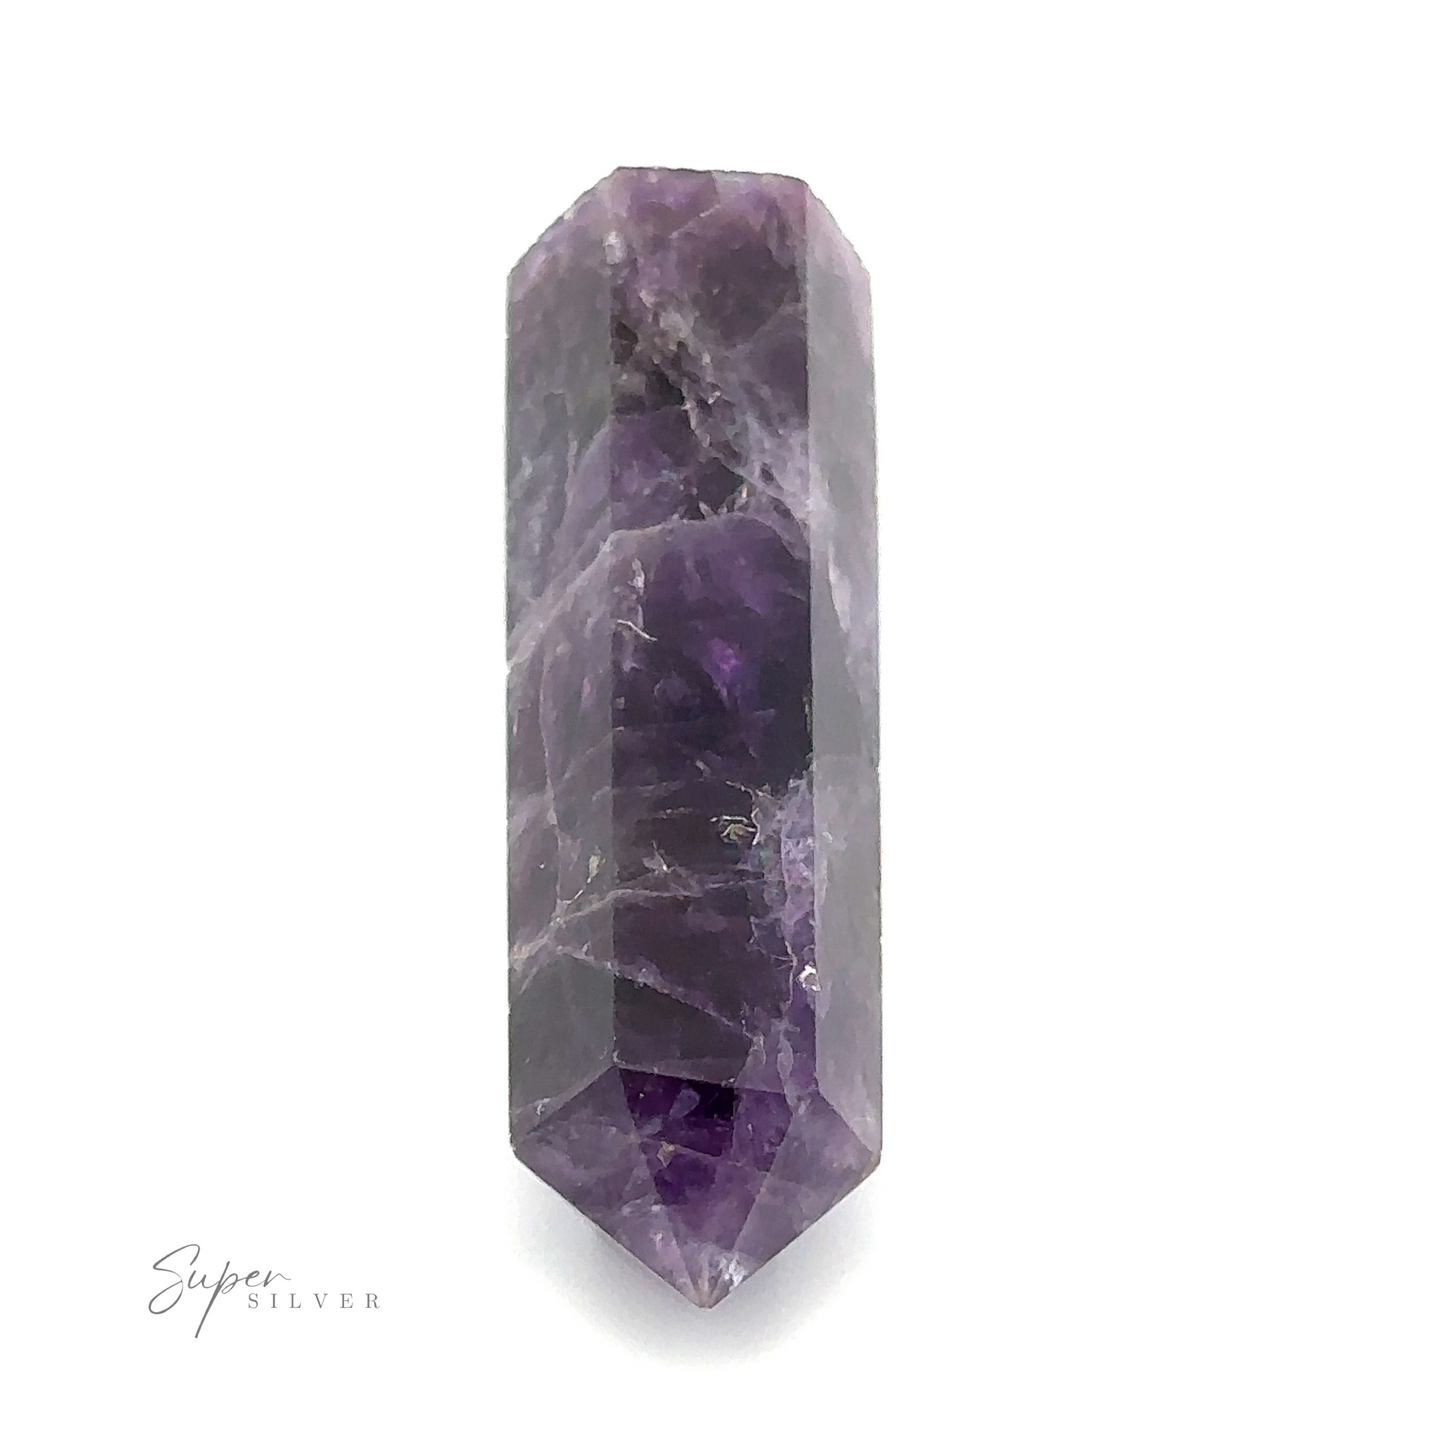 
                  
                    A polished, hexagonal amethyst crystal point with varying shades of purple and white inclusions, resembling a Raw Stone Obelisk Pendant. The logo "Super Silver" is in the bottom left corner.
                  
                